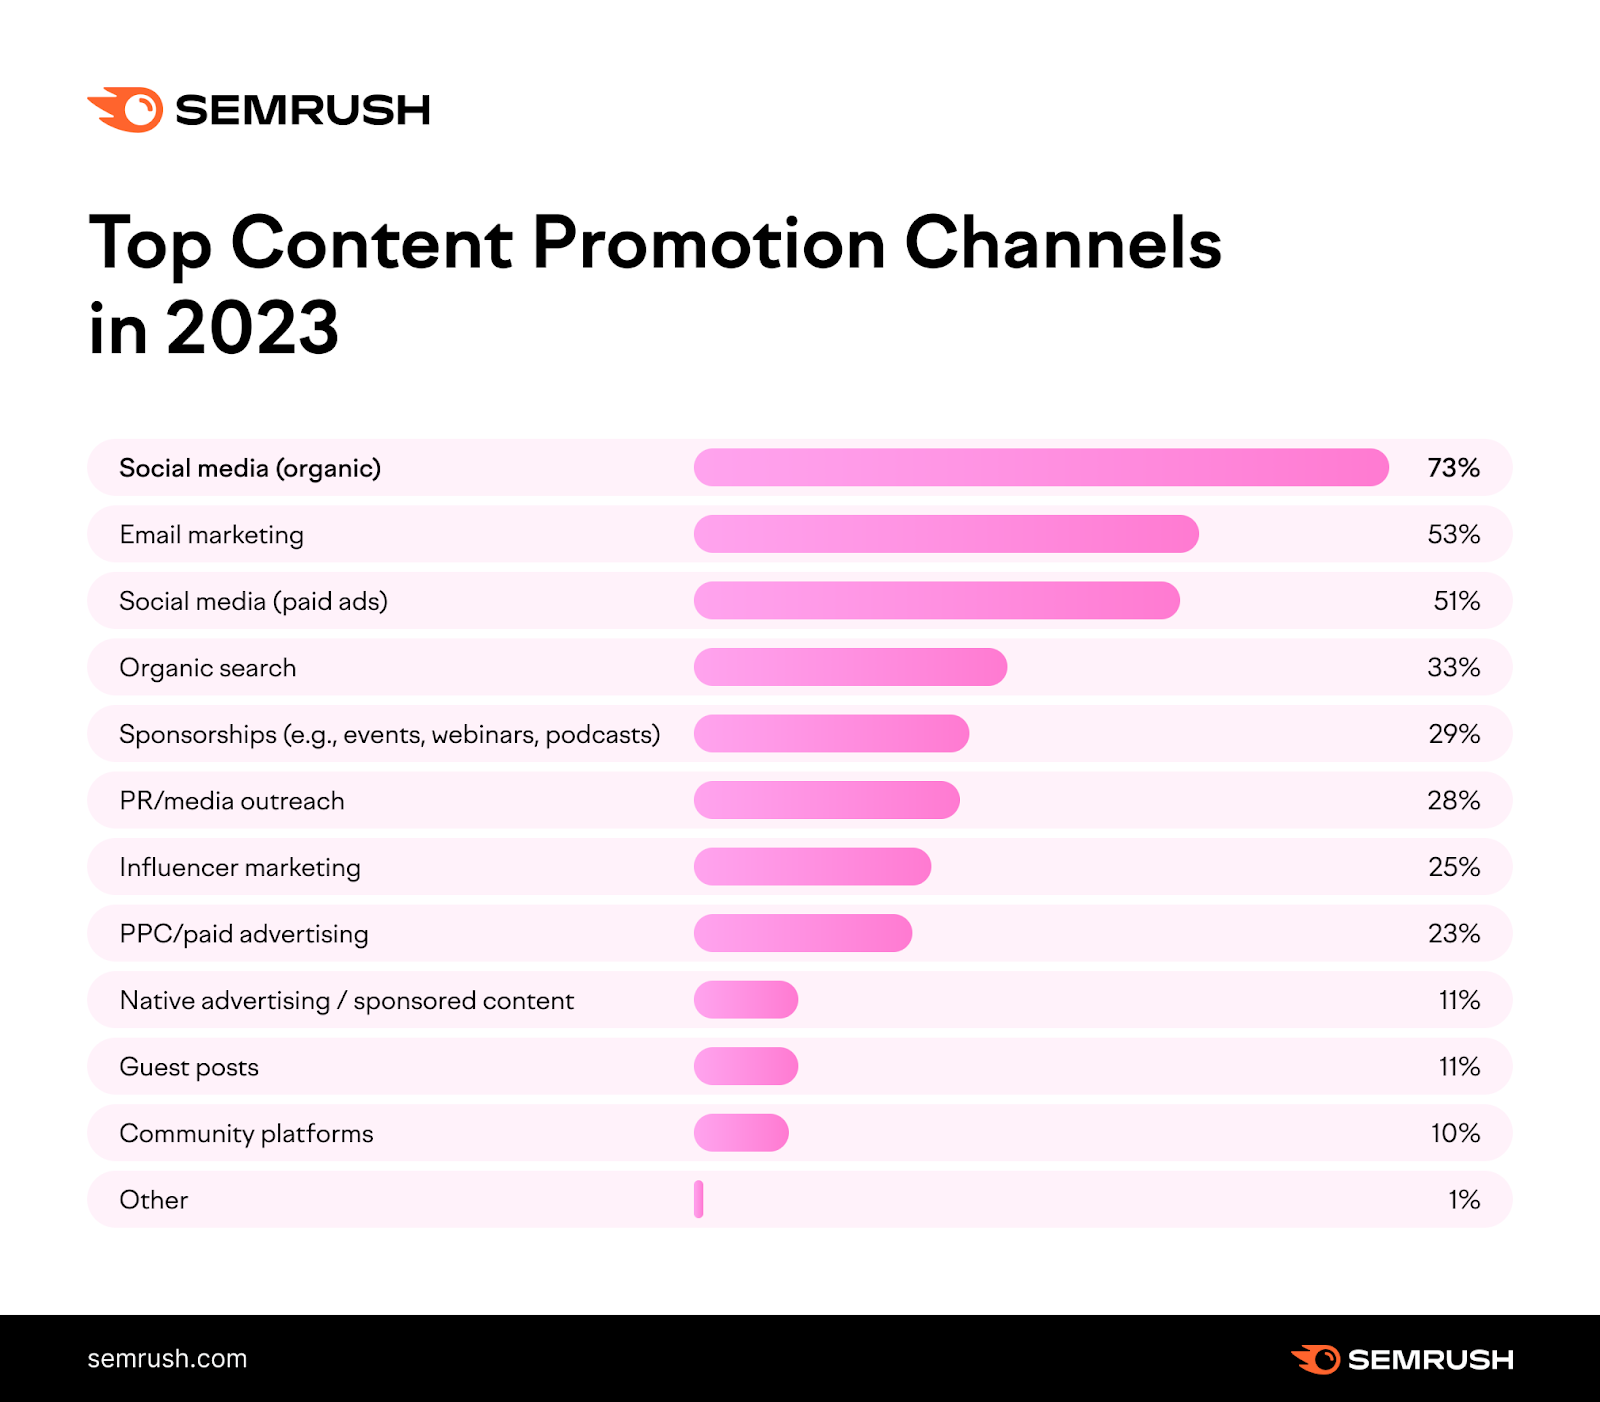 A chart showing top content promotion channels in 2023 based on Semrush research